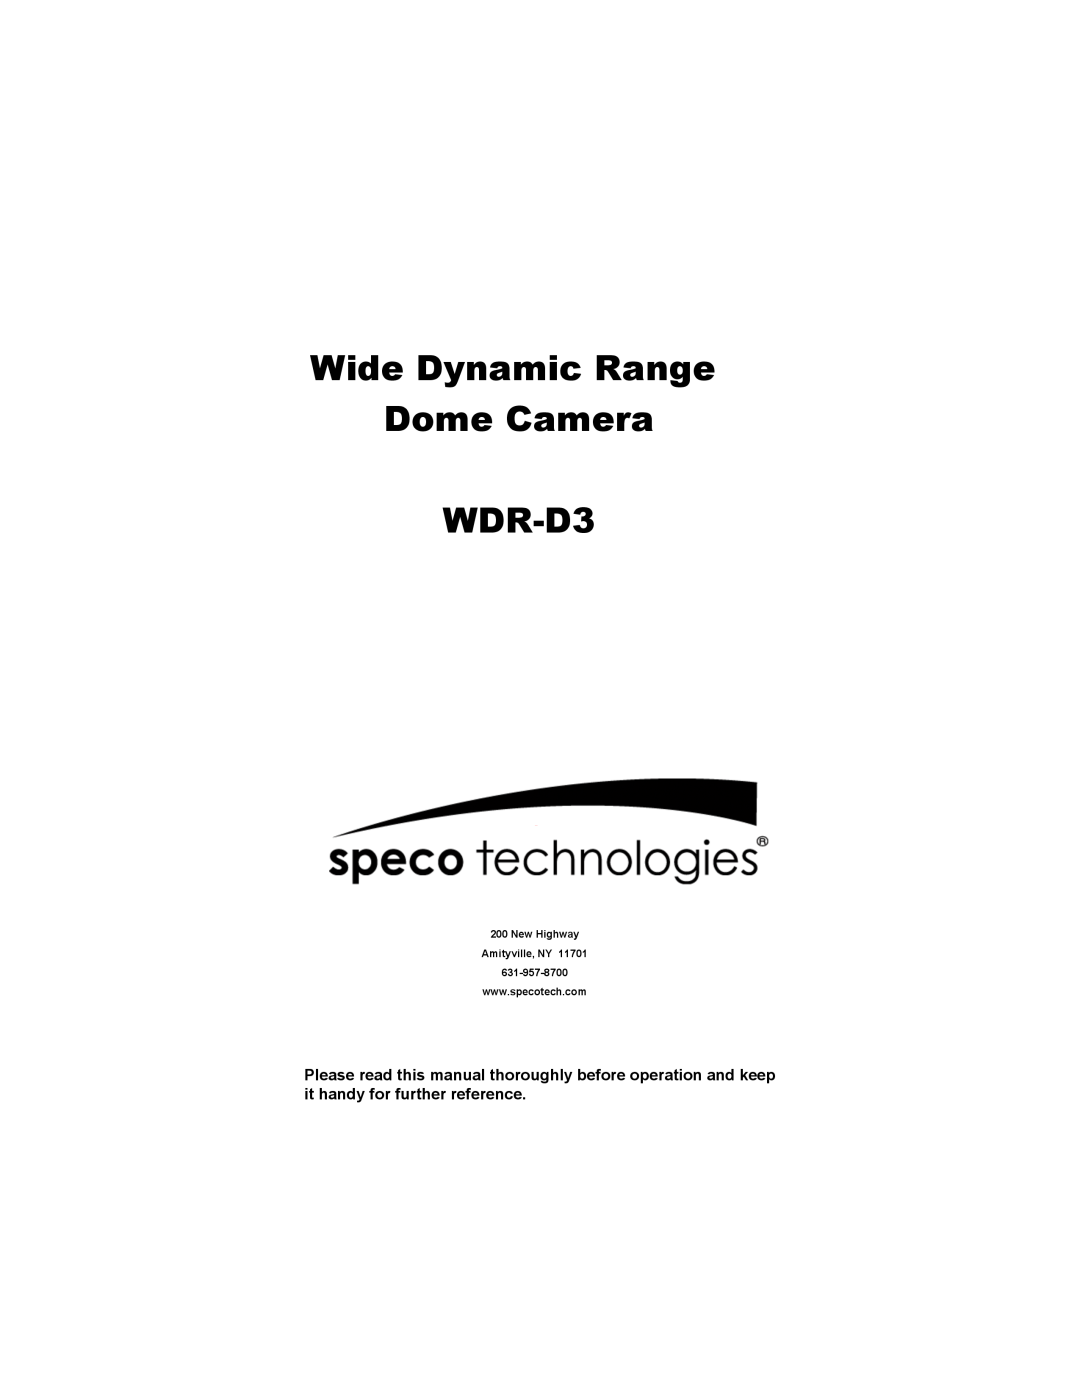 Speco Technologies WDR-R3 manual New Highway Amityville, NY, Wide Dynamic Range Dome Camera WDR-D3 